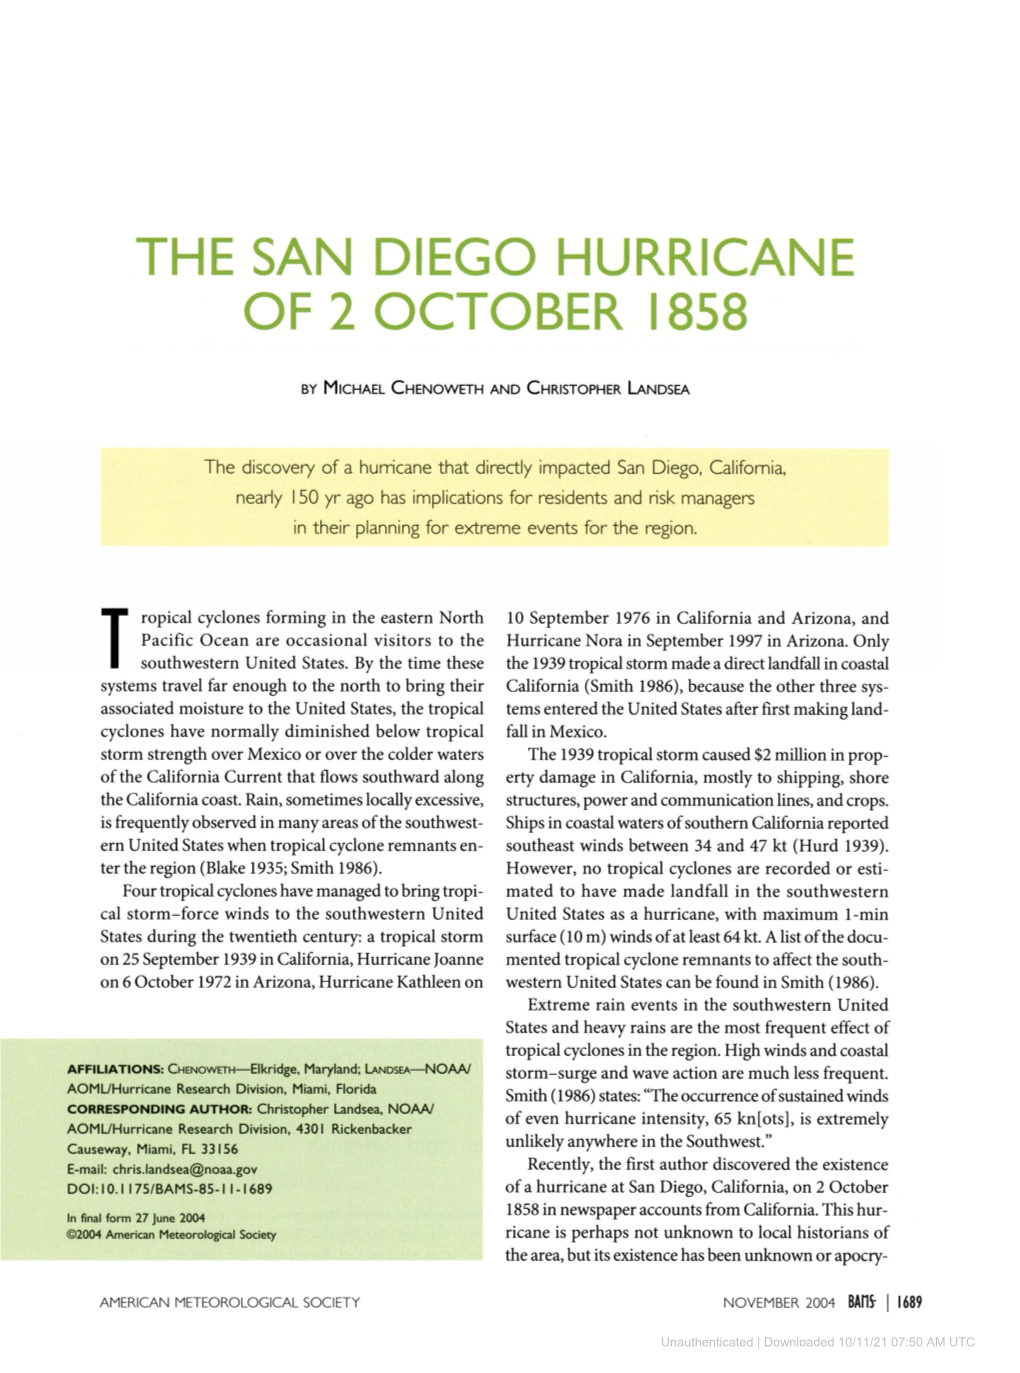 The San Diego Hurricane of 2 October 1858